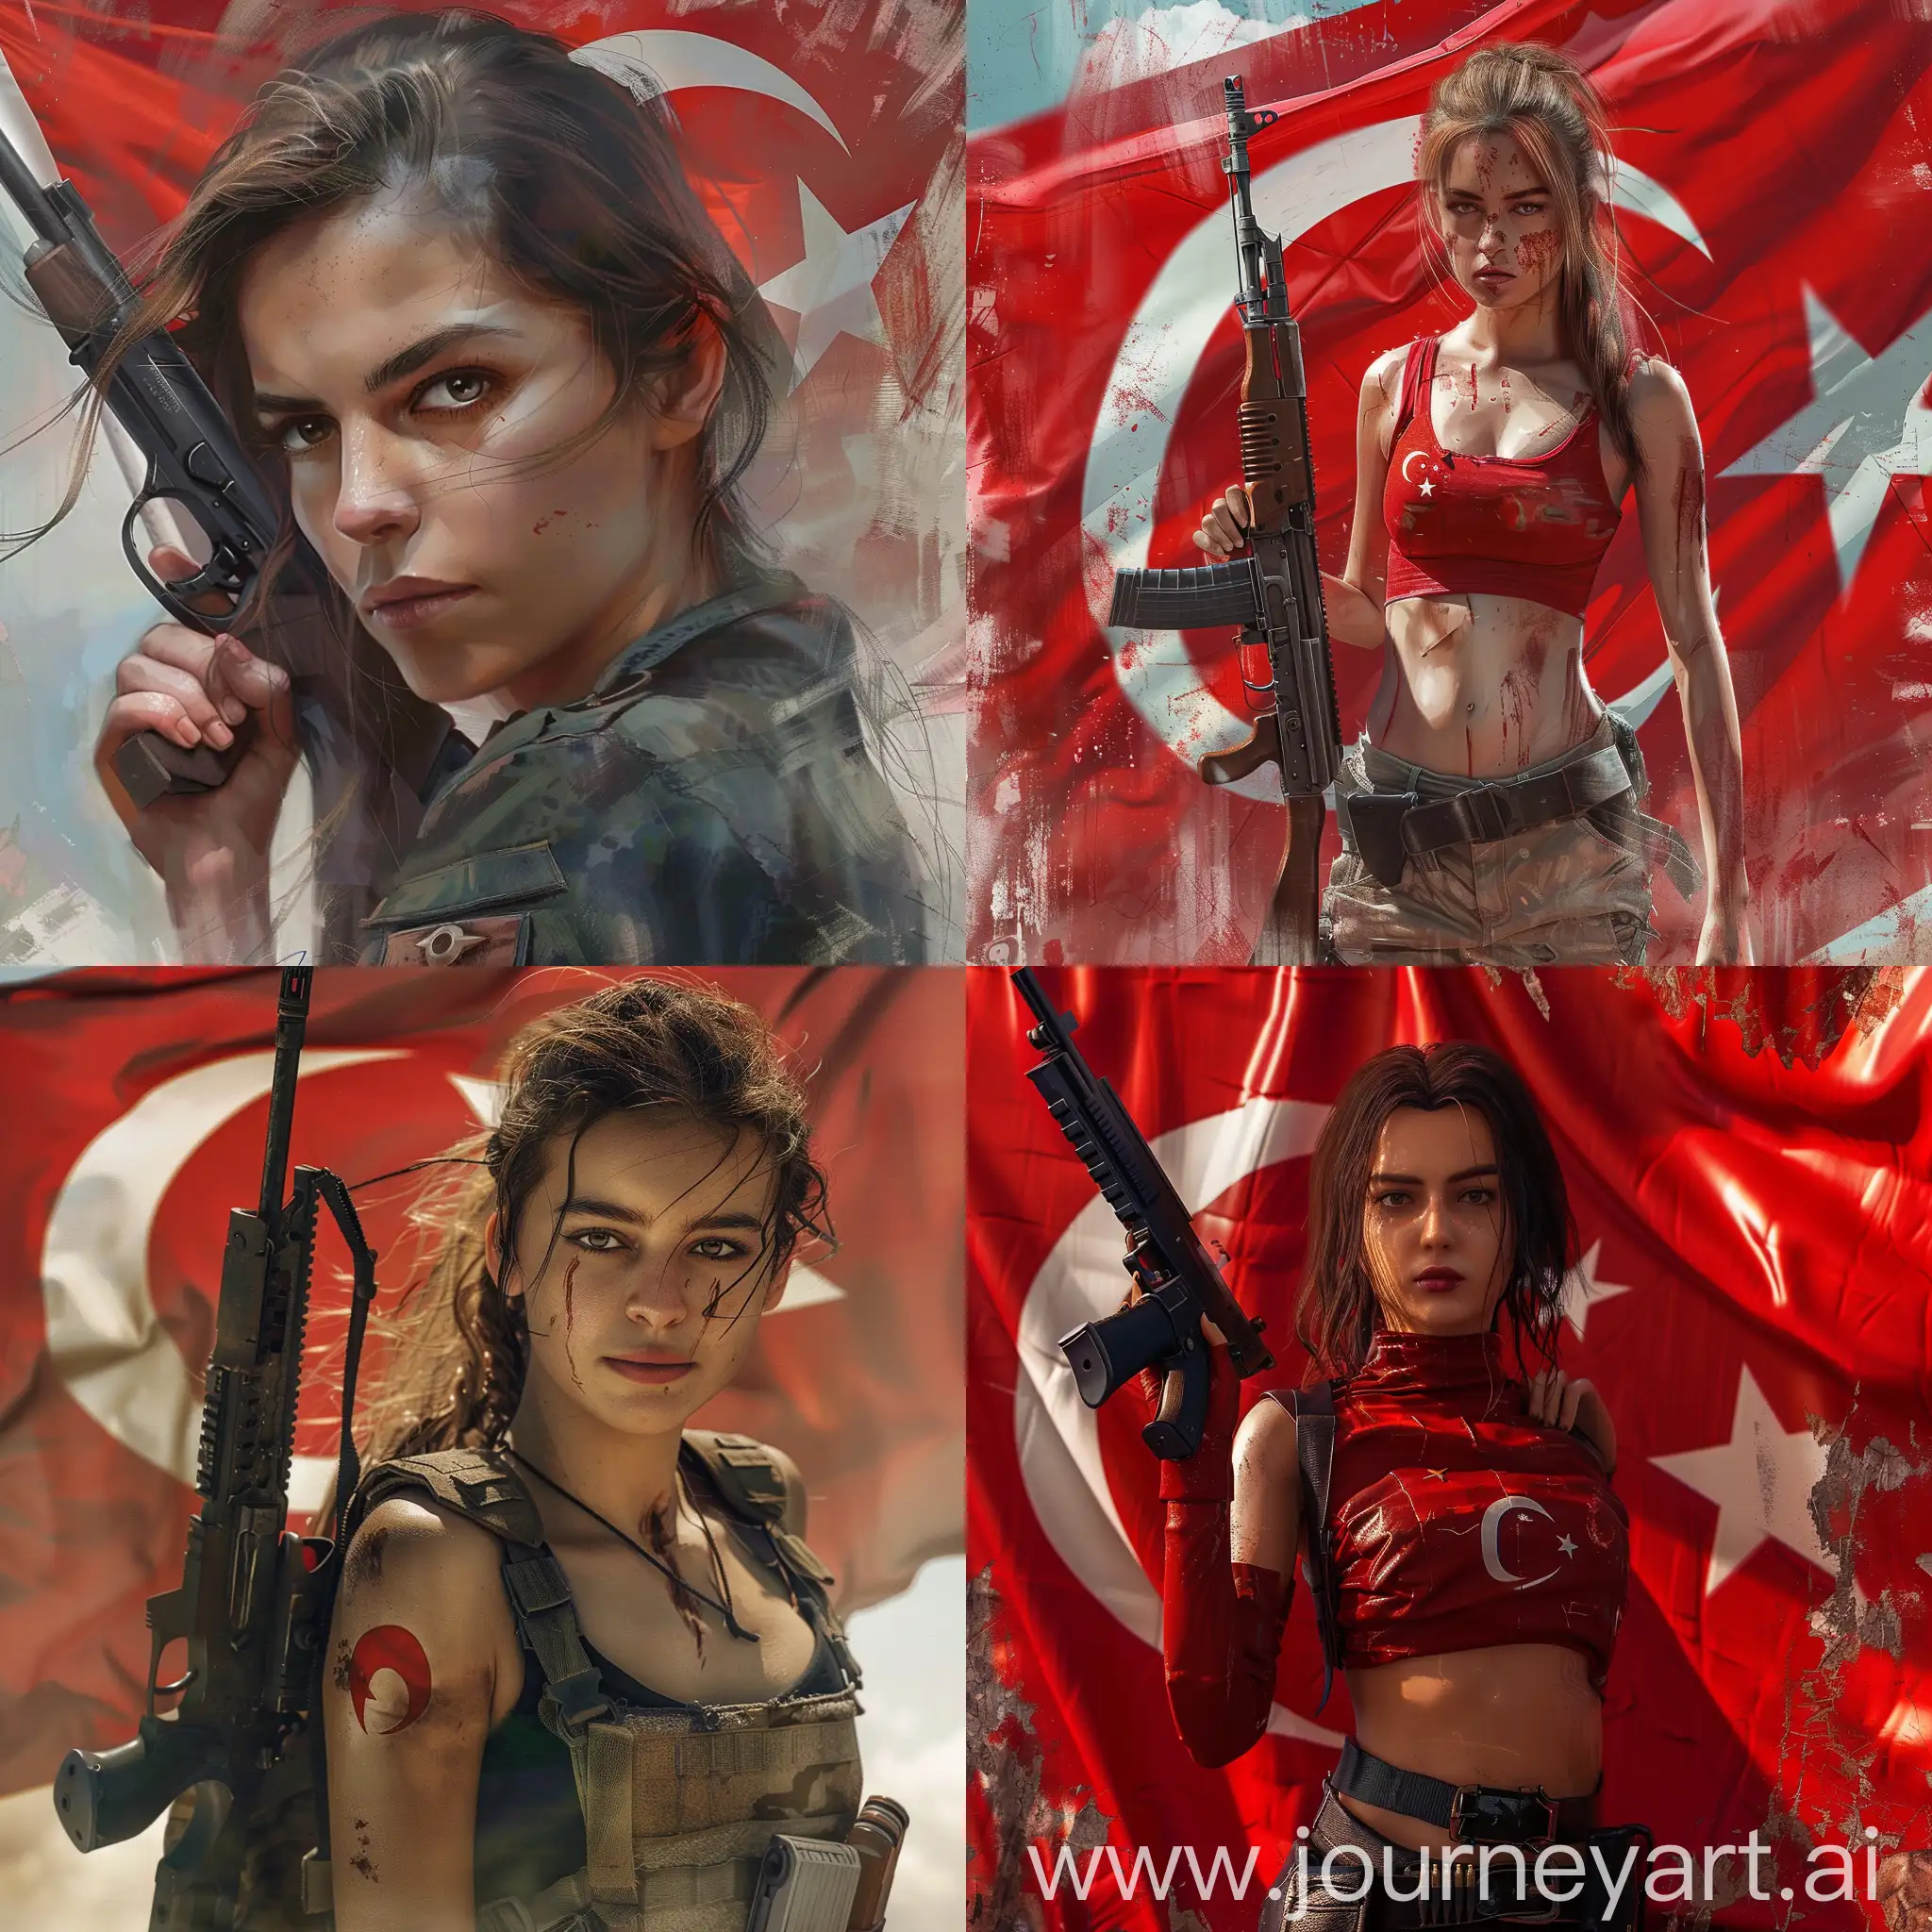 Turkish-Flag-with-Realistic-Girl-Holding-a-Gun